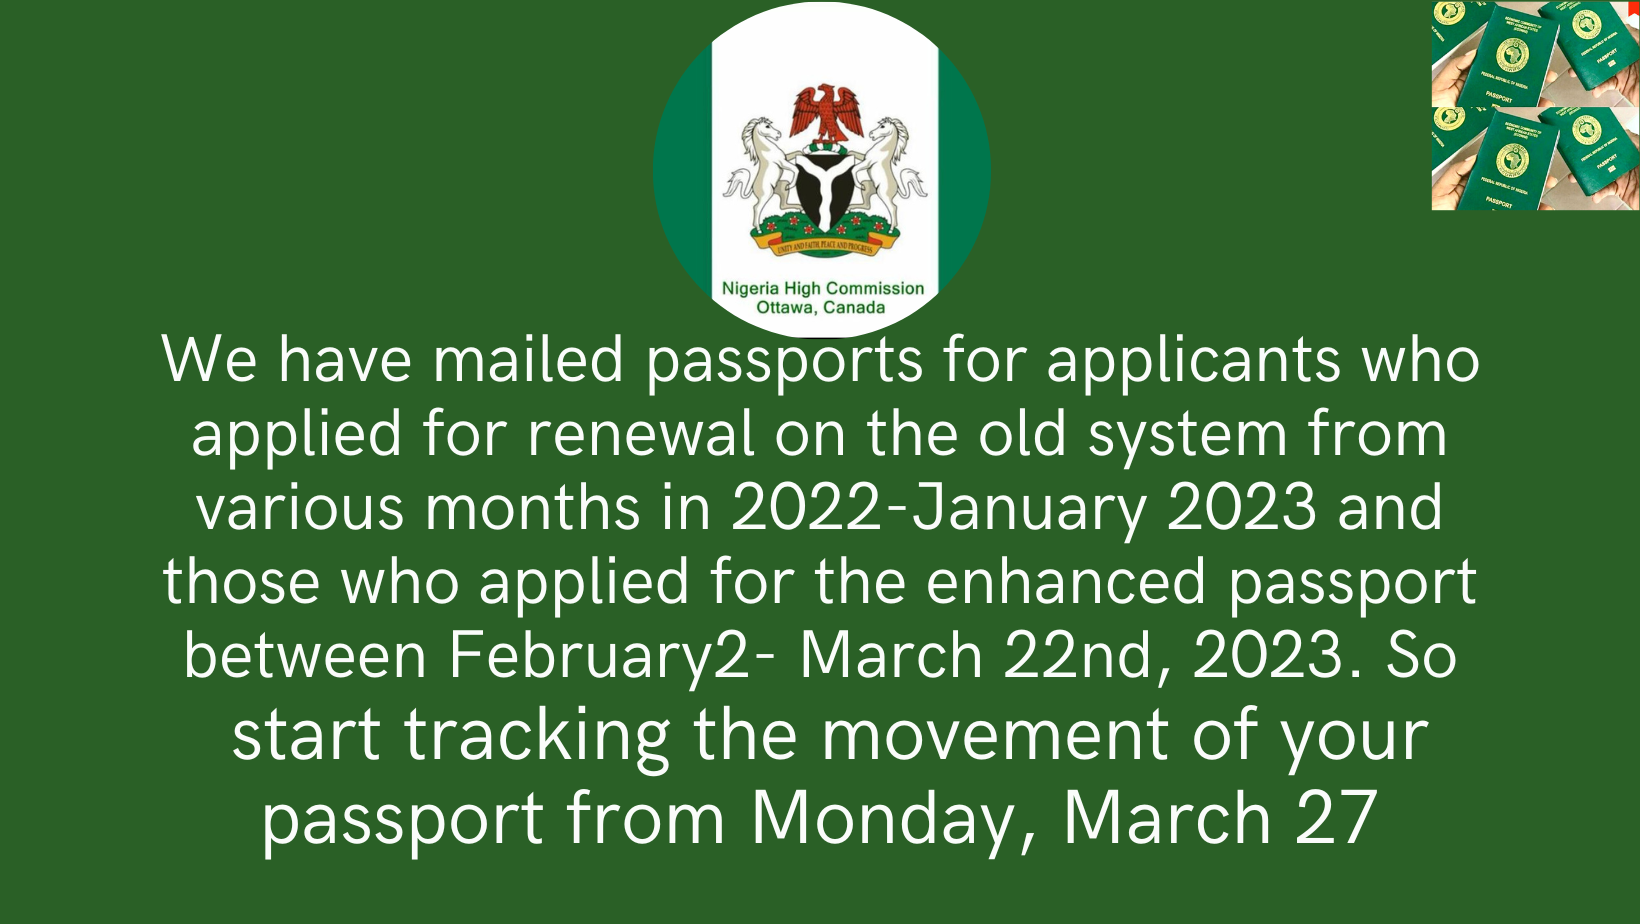 UPDATE FROM THE PASSPORT UNIT